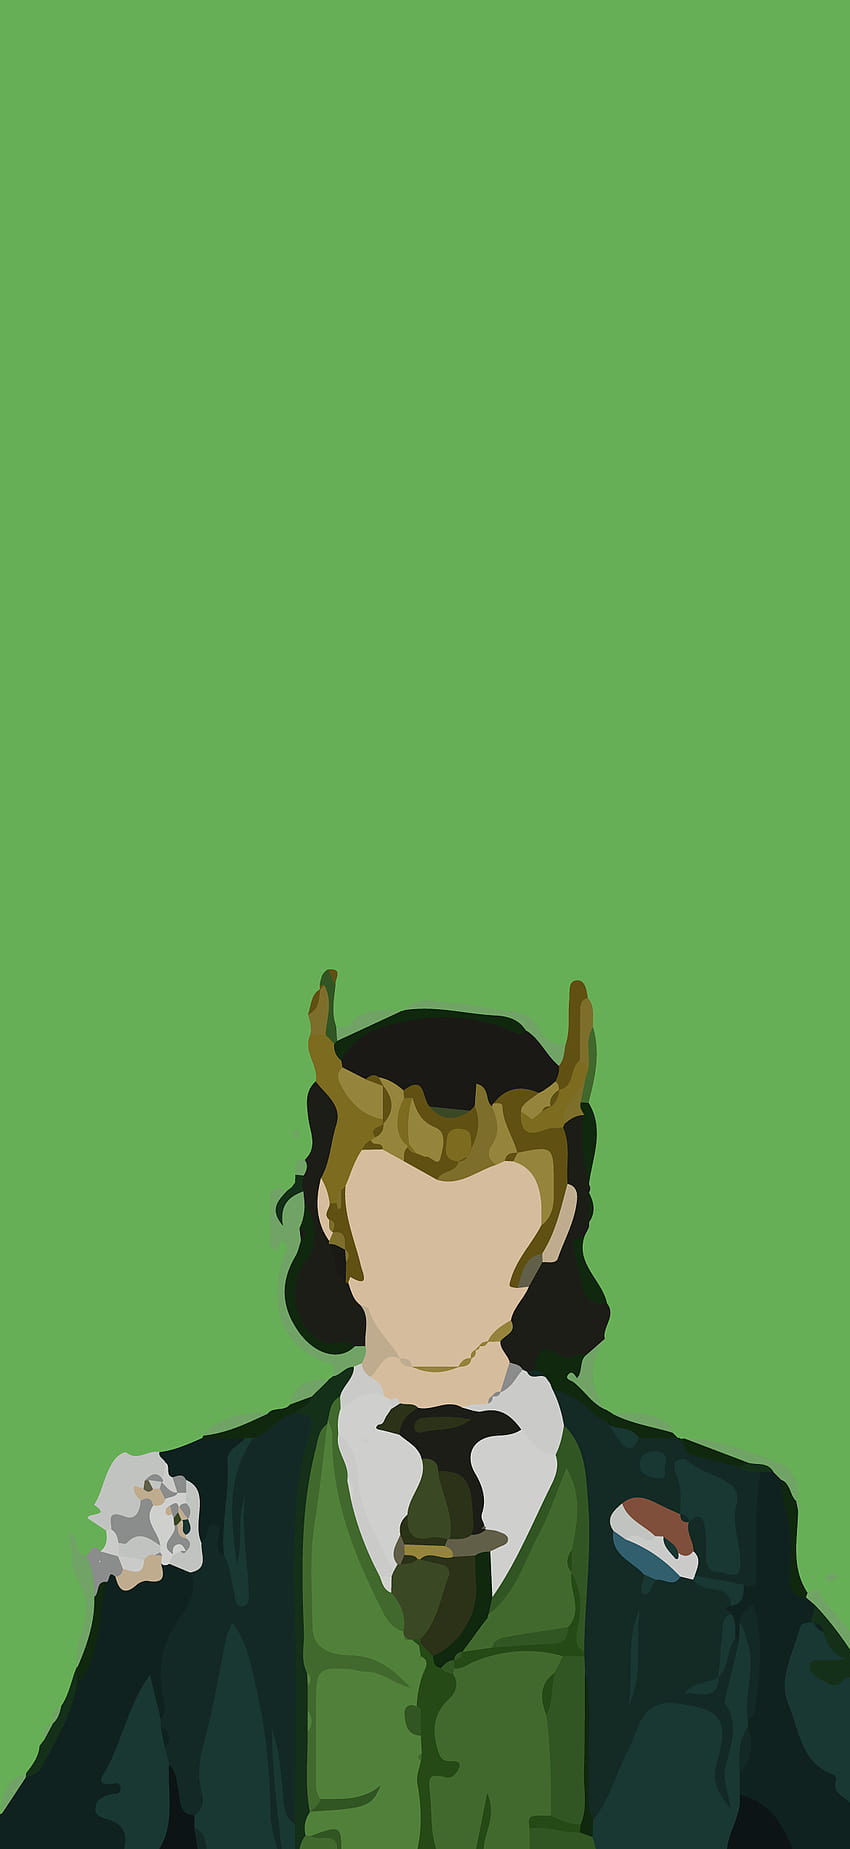 28 Collection Of Loki Drawing Anime - Loki Anime Divine Gate - 1024x1365  PNG Download - PNGkit